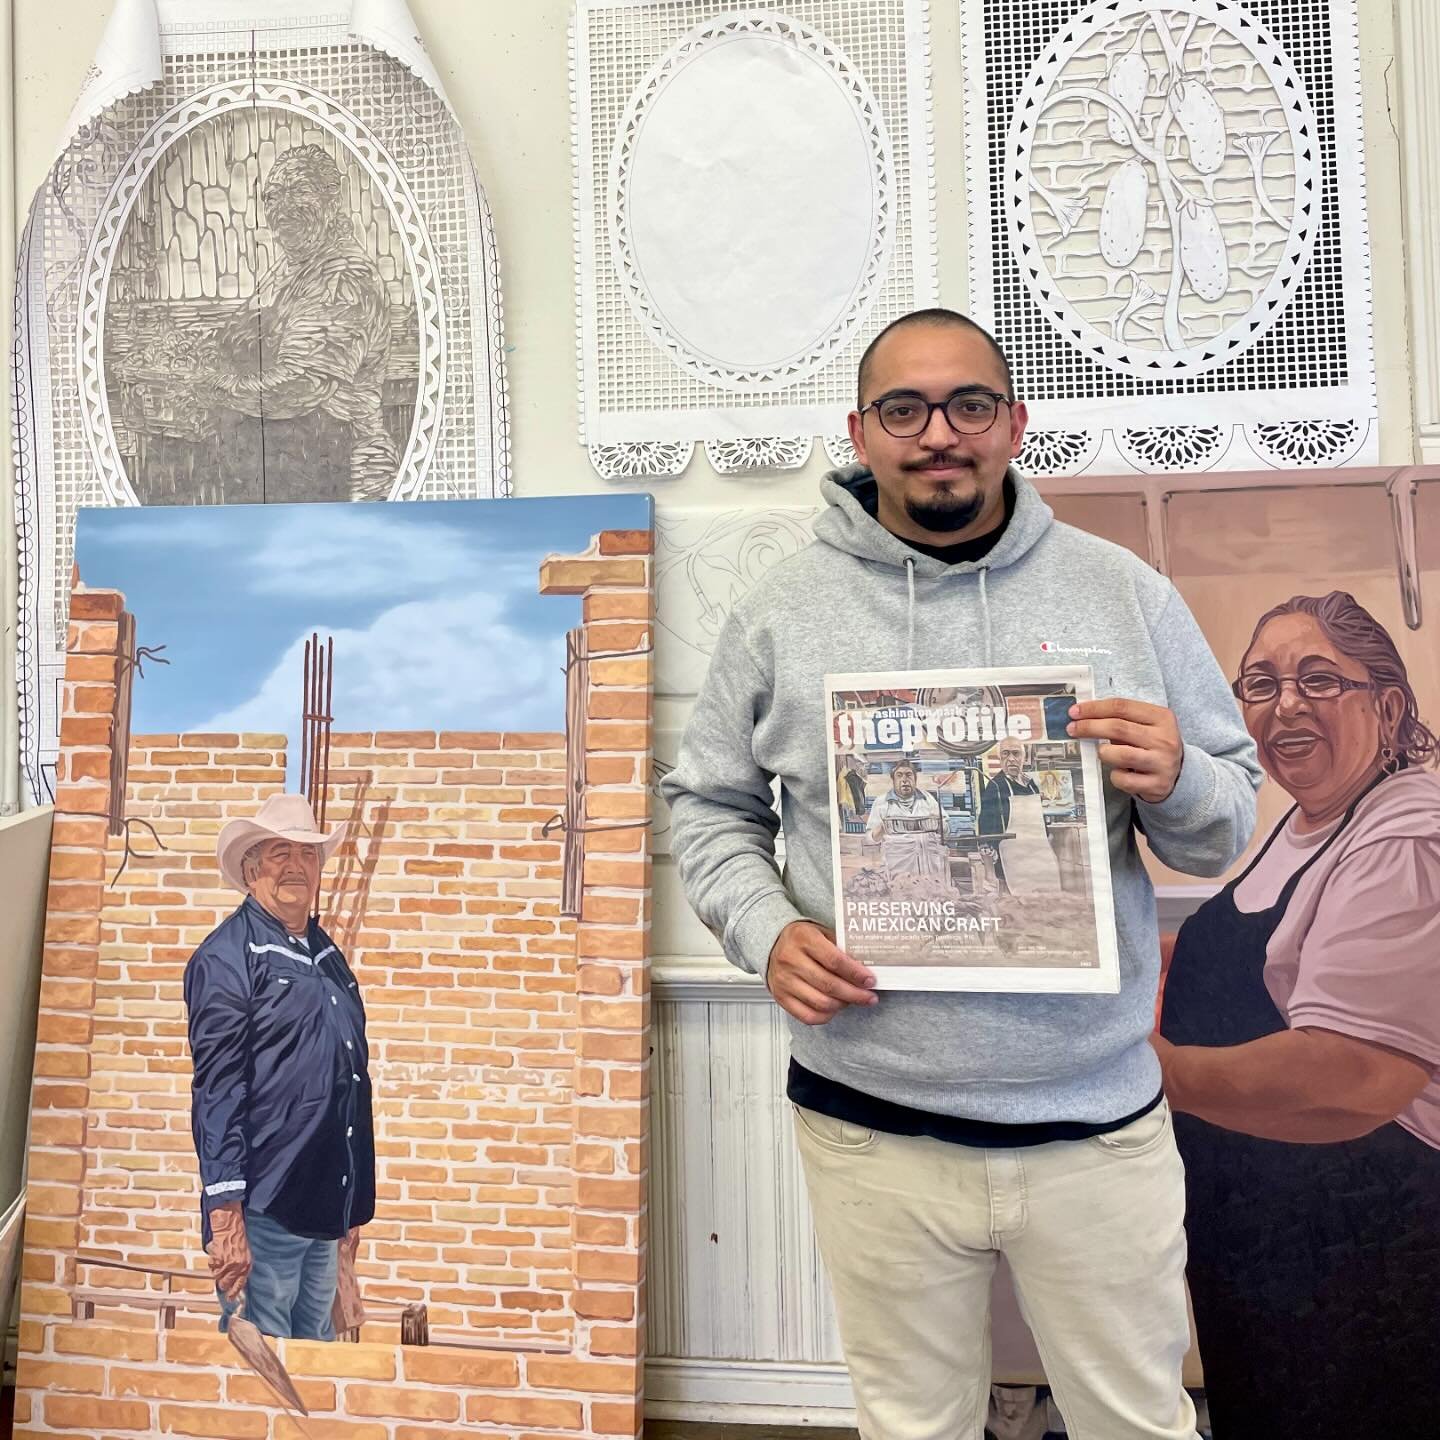 @lupehernandez_art says his residency at @artstudentsleaguedenver has allowed him to shift his focus from &ldquo;palatable to personal&rdquo; and create art that is truly meaningful to him. 

Sharing his story and work through press is an honor, incl